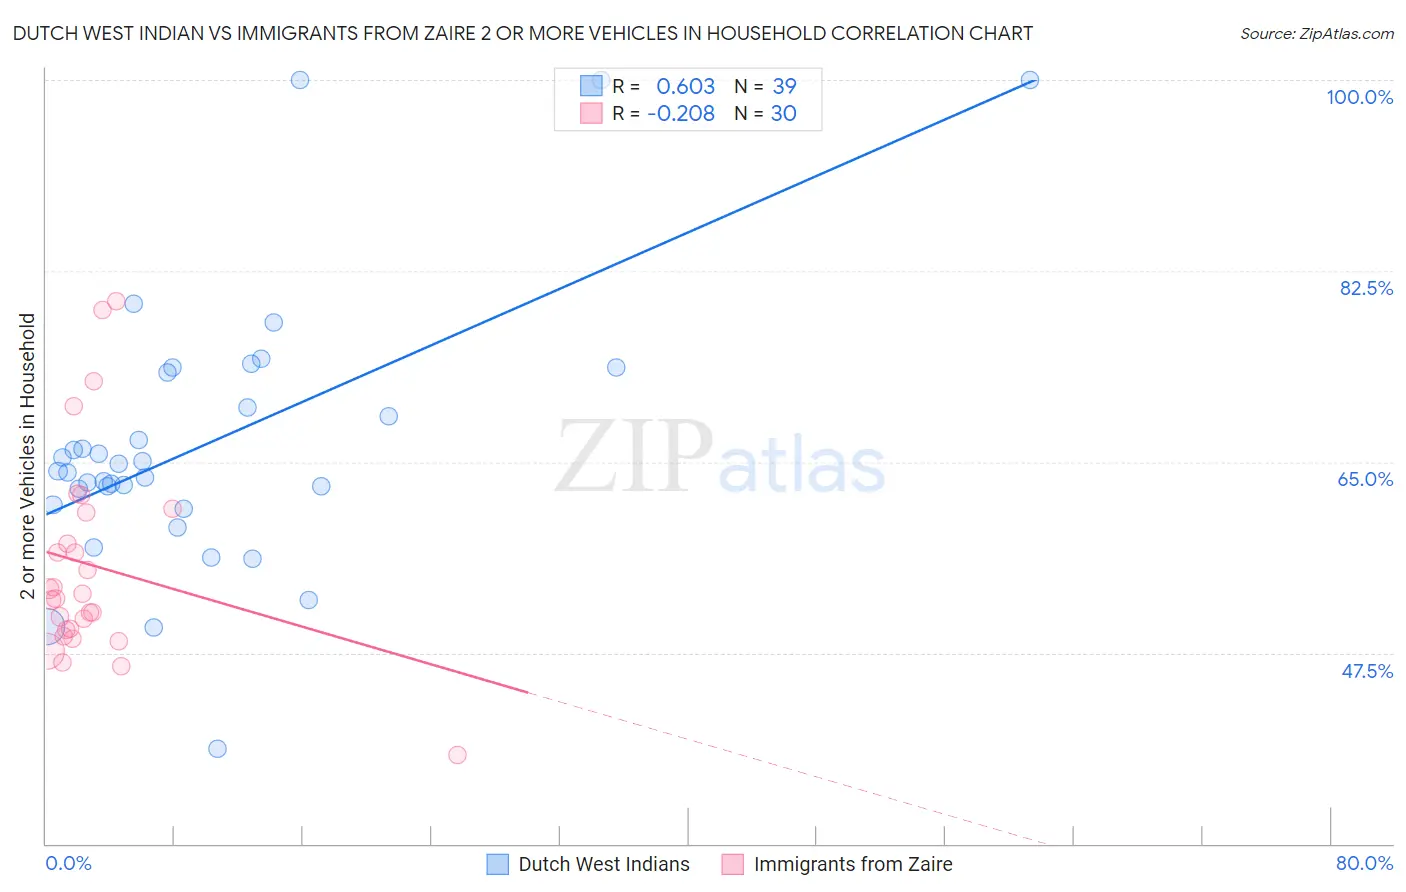 Dutch West Indian vs Immigrants from Zaire 2 or more Vehicles in Household